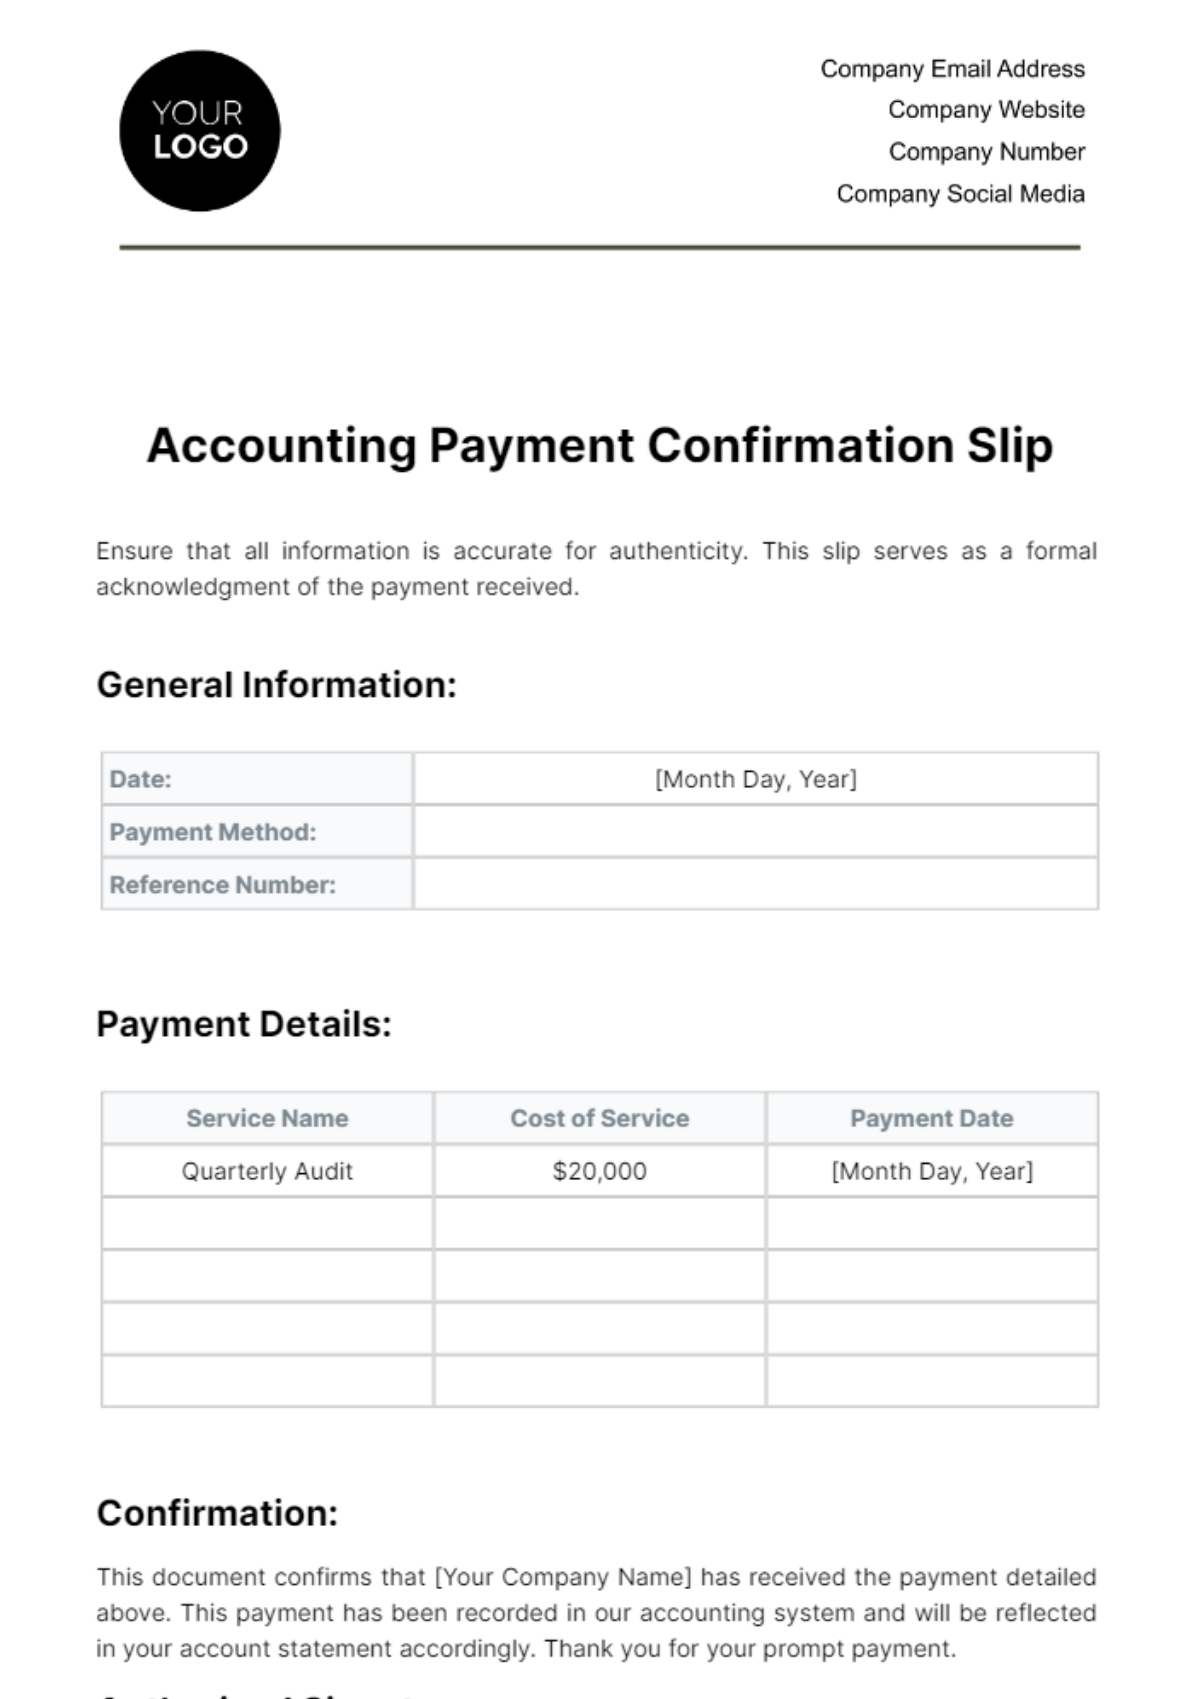 Accounting Payment Confirmation Slip Template